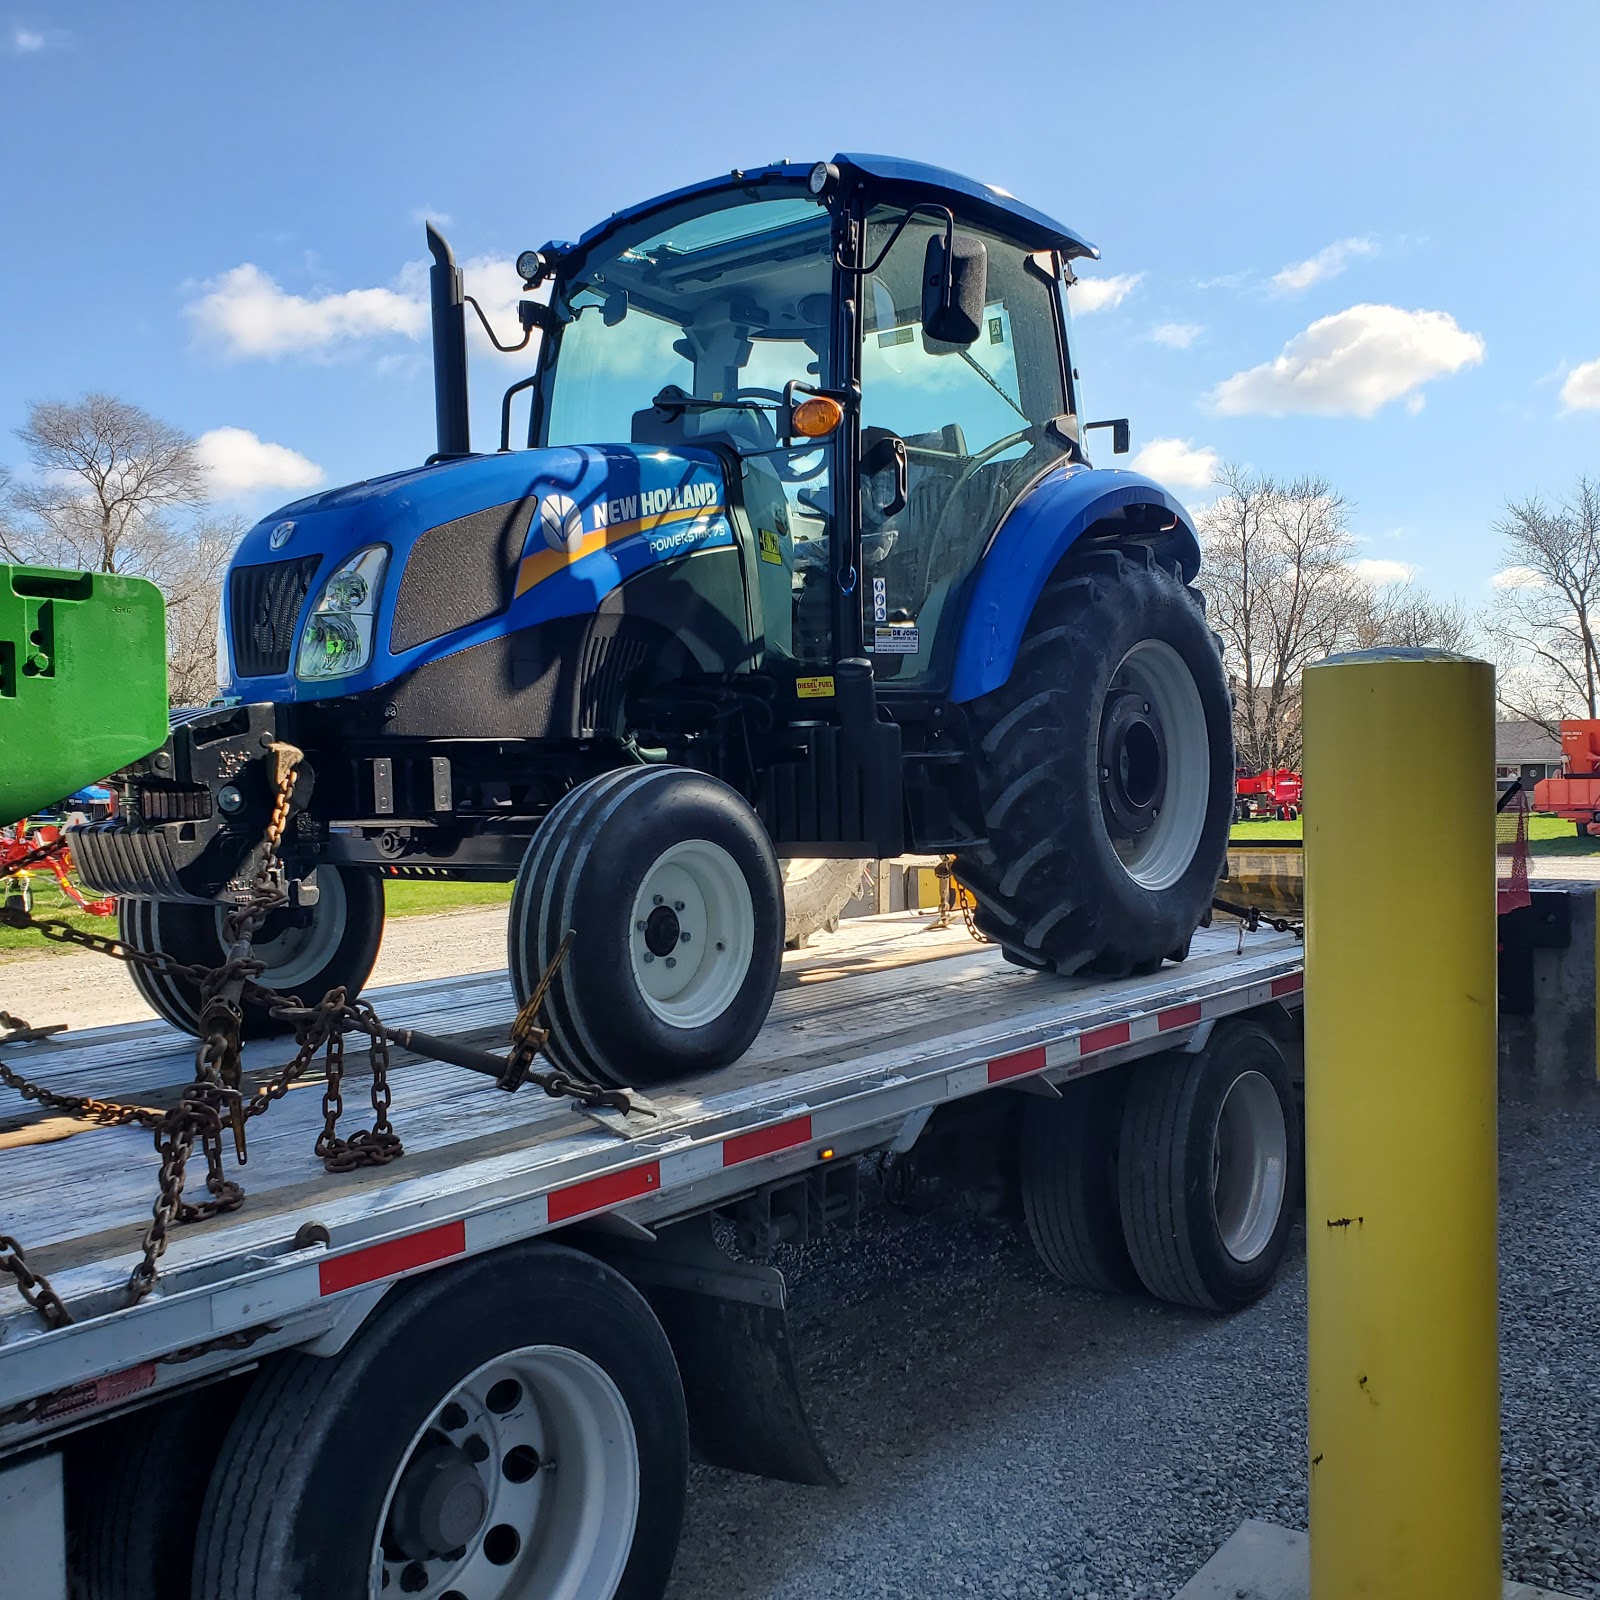 Shipping a New Holland Powerstar 75 Tractor